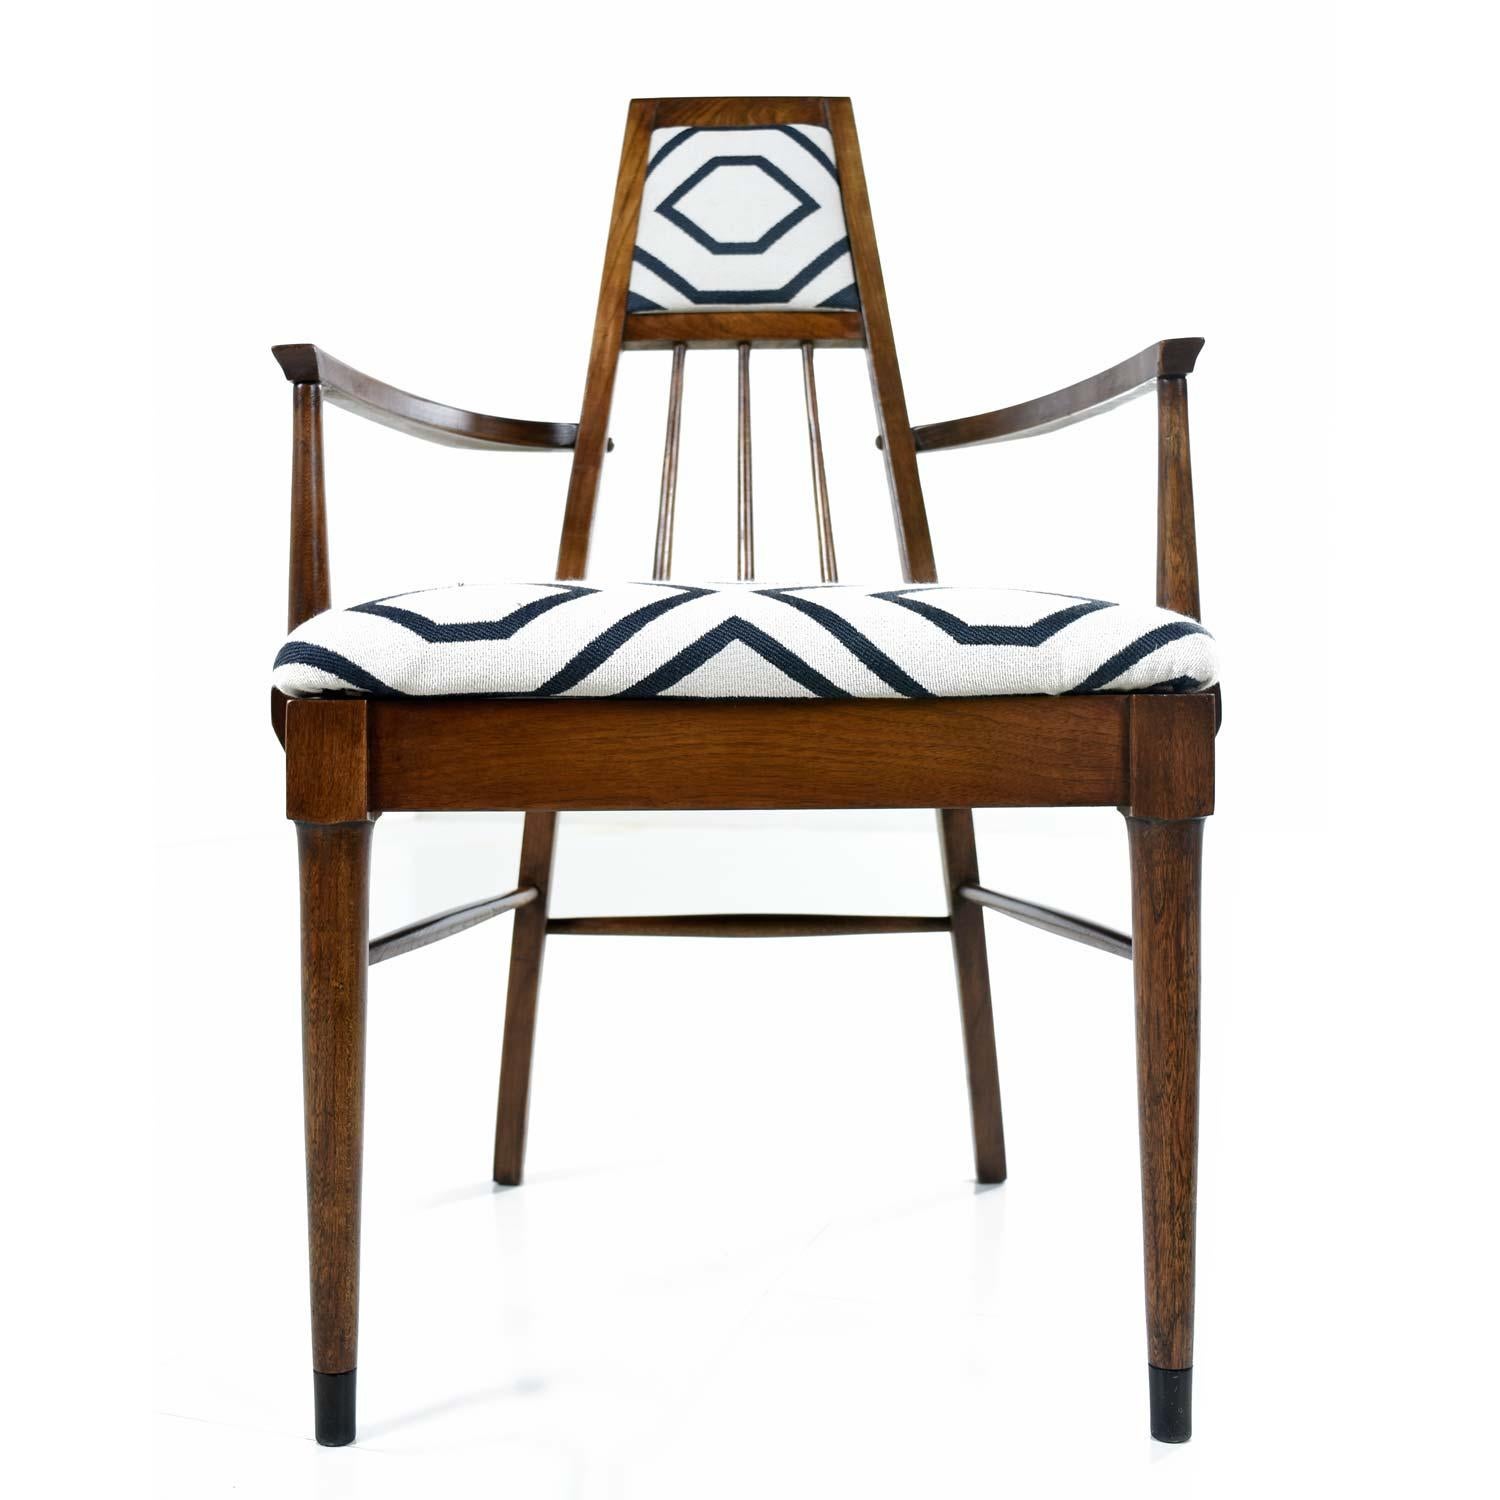 Solid Walnut Mid-Century Modern Chairs in Navy and Ivory Fabric 1